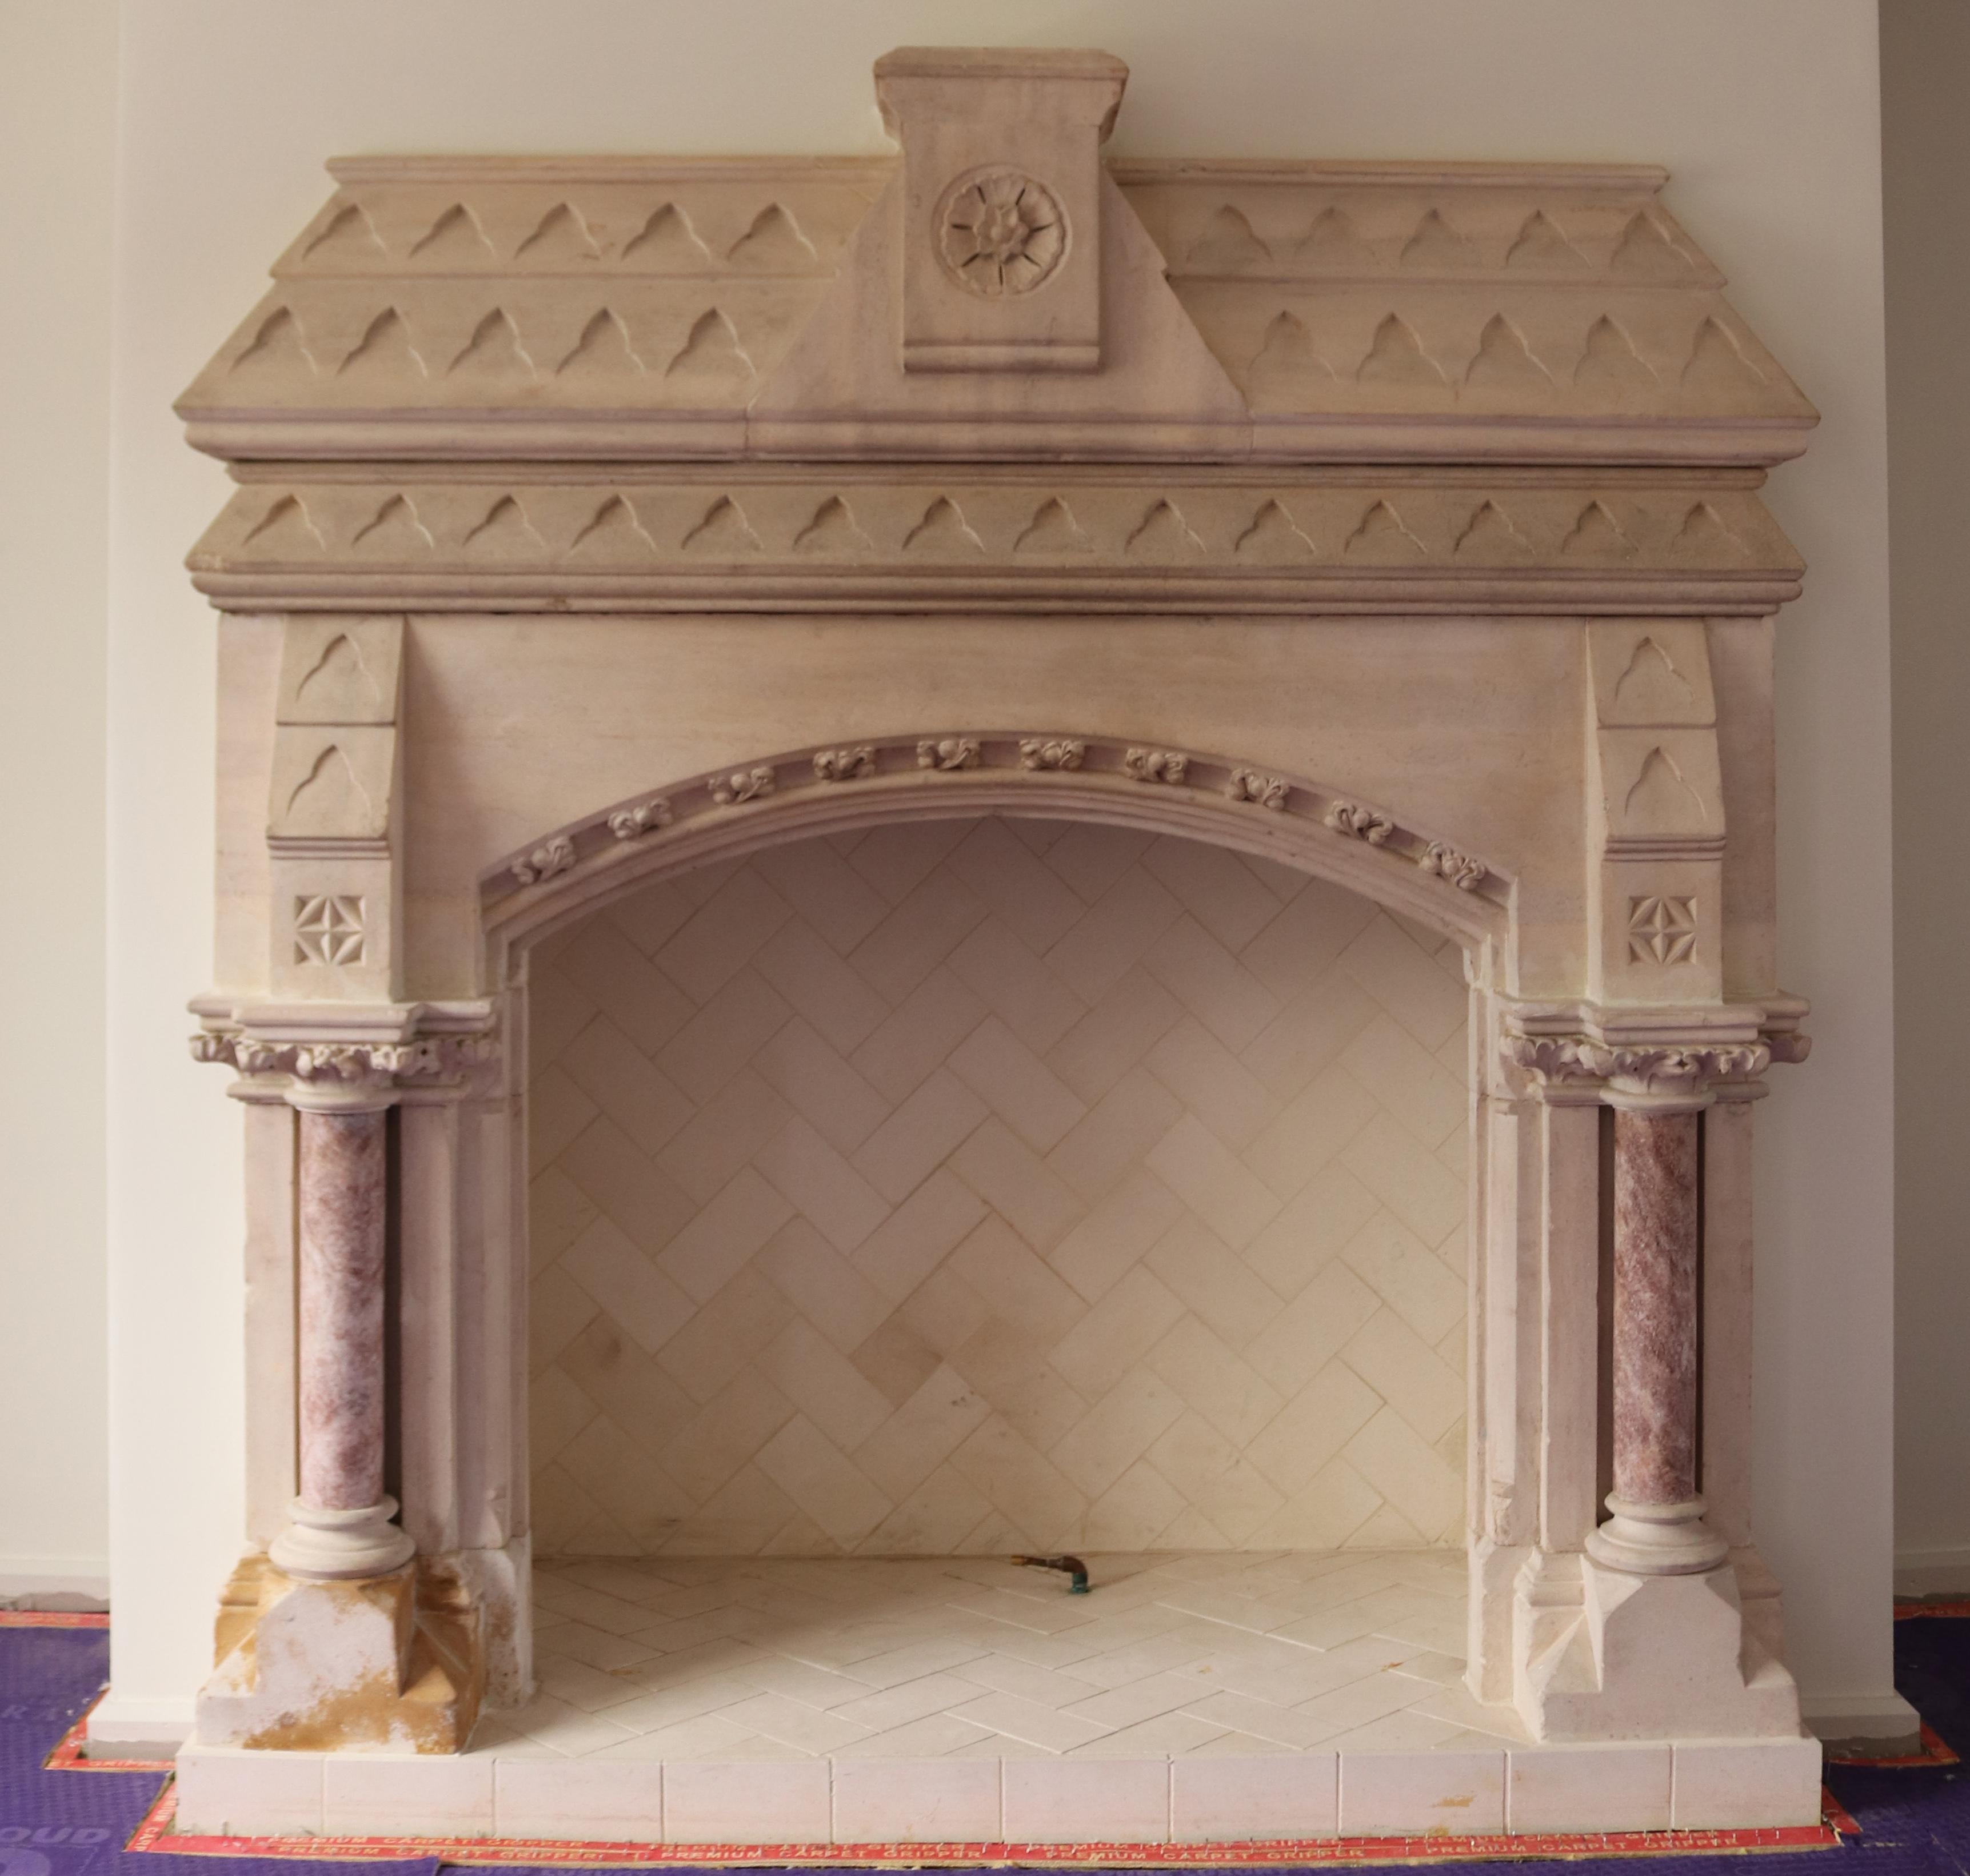 A mid-19th century English, Gothic Revival fireplace. This fireplace bears similarities with two
surrounds supplied to Presentation Convent, Co. Waterford, designed by Augustus Pugin and
completed by his son Edward Pugin.

Carved from Caen